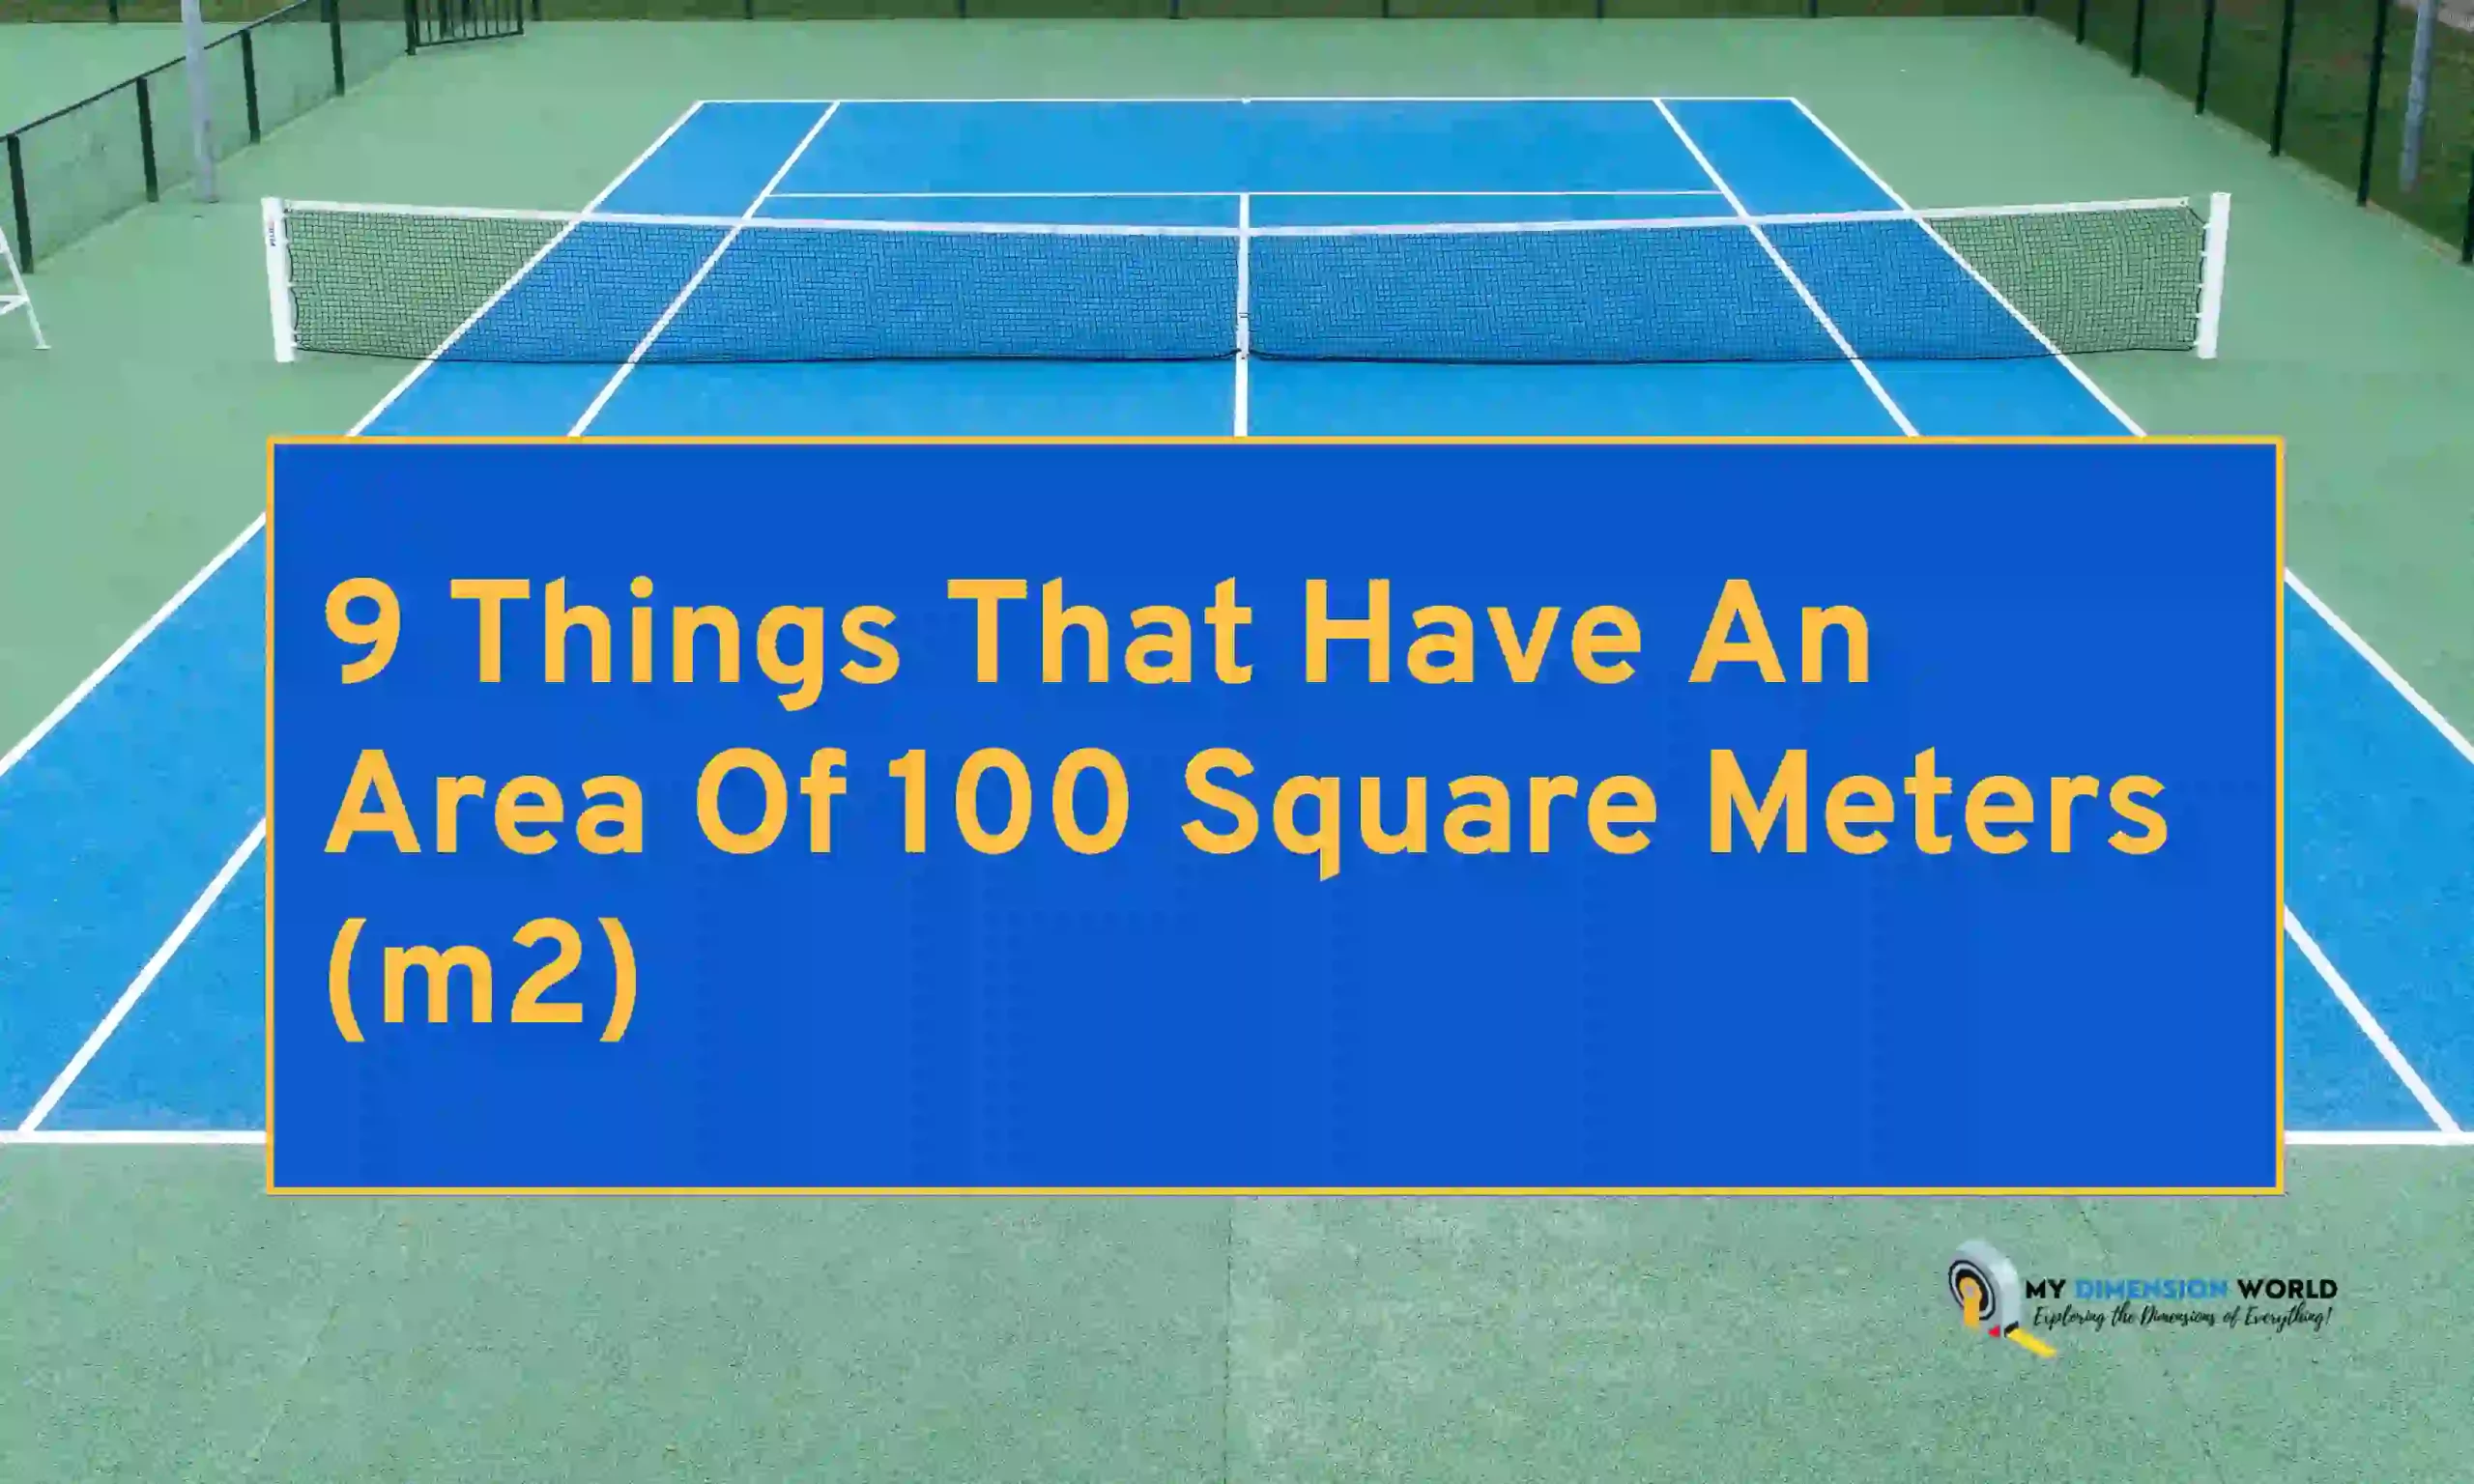 9 Things That Have An Area Of 100 Square Meters (m2)